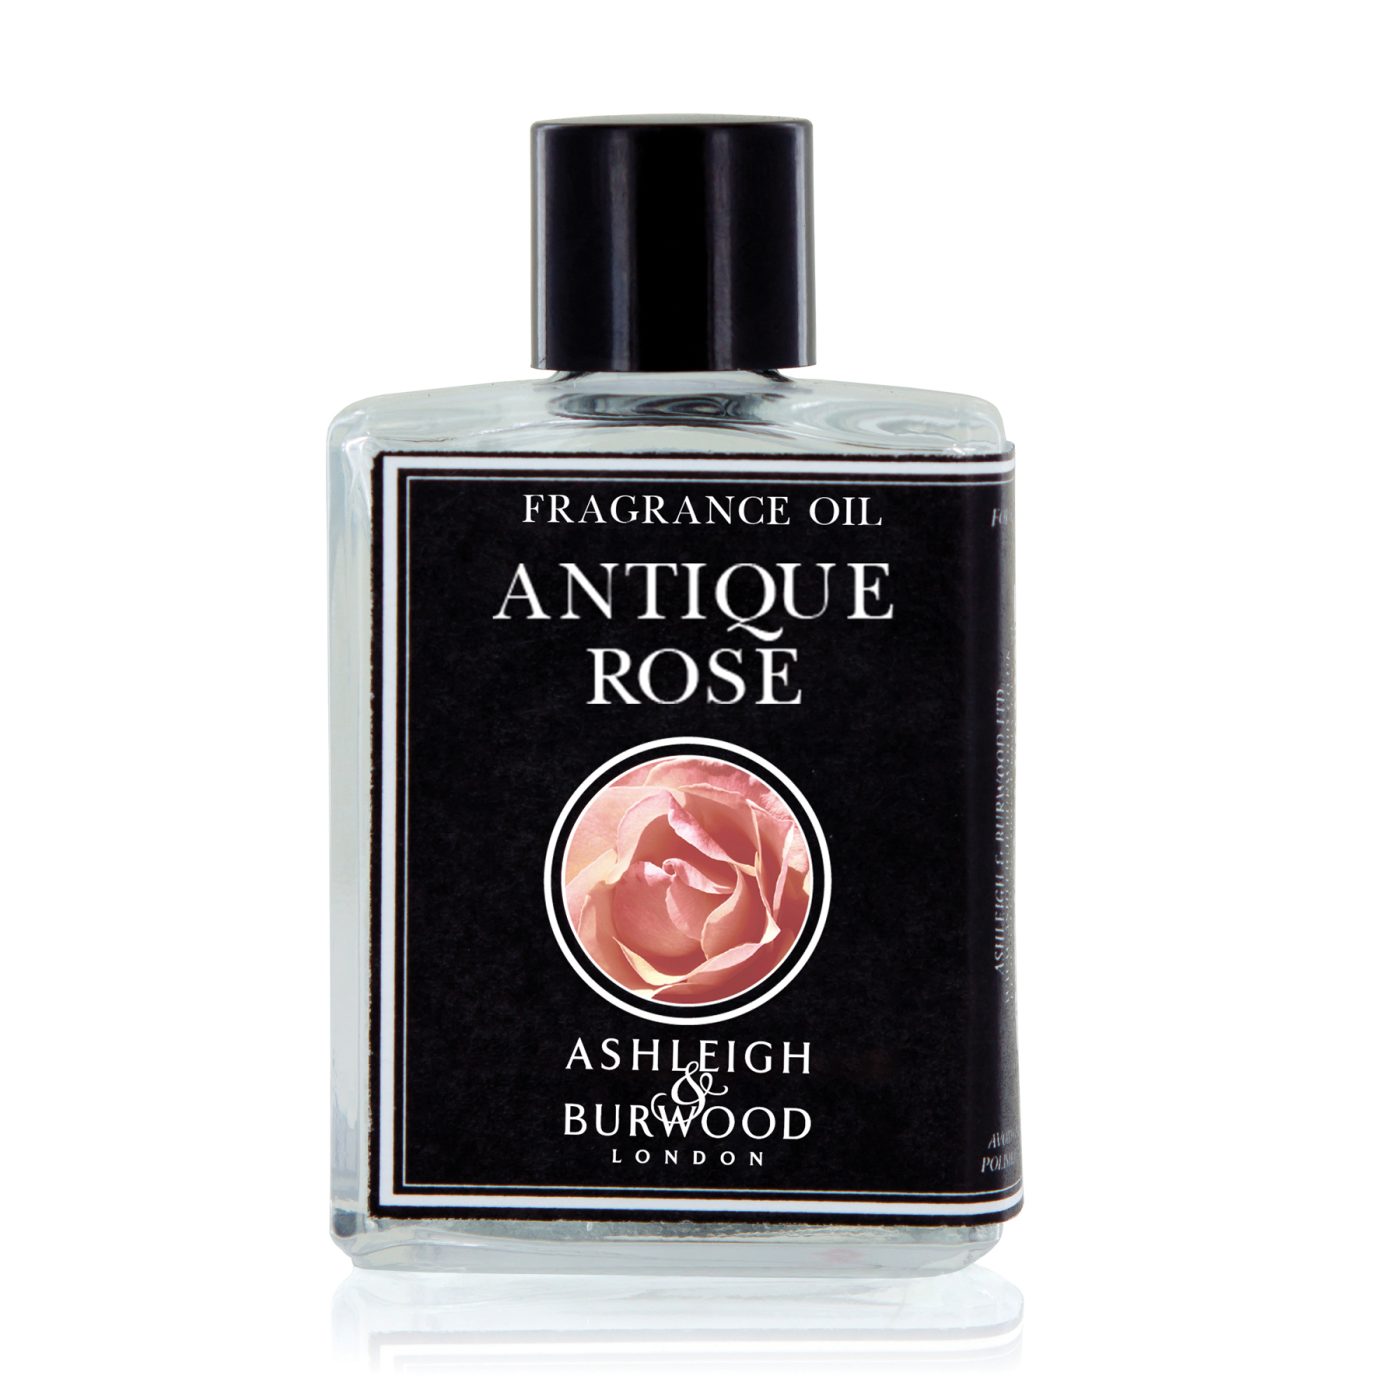 A & B Antique Rose Small Fragrance Oil